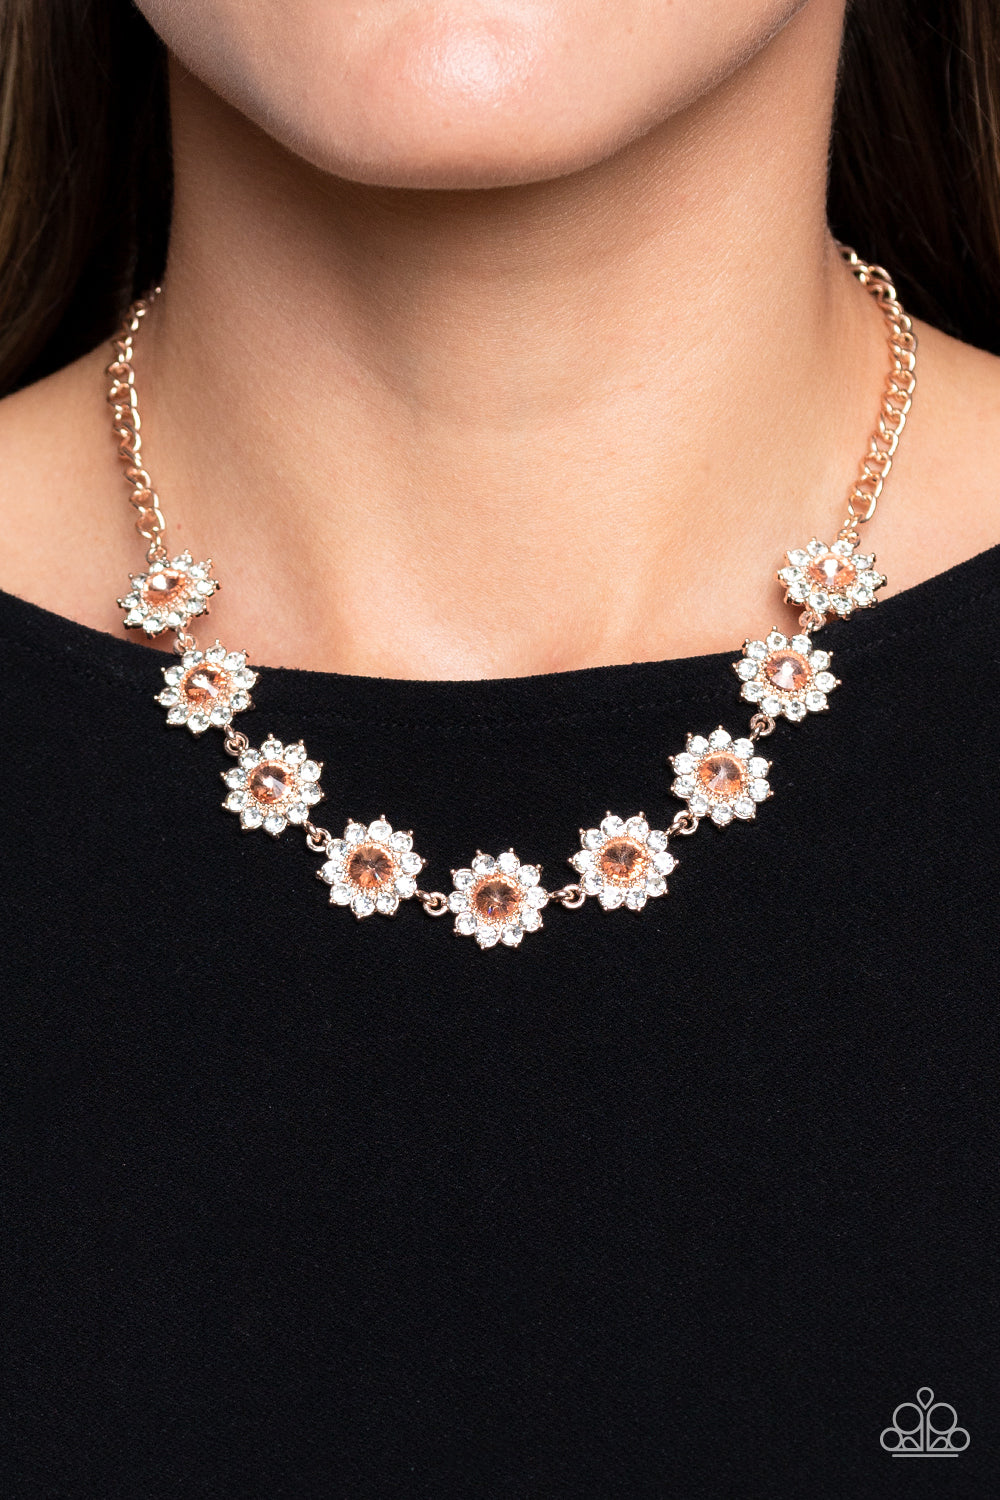 Paparazzi Accessories Blooming Brilliance - Rose Gold Shiny white rhinestone petals bloom from a shimmery peachy center, creating a whimsical floral arrangement of rose gold below the collar. Features an adjustable clasp closure. Sold as one individual ne